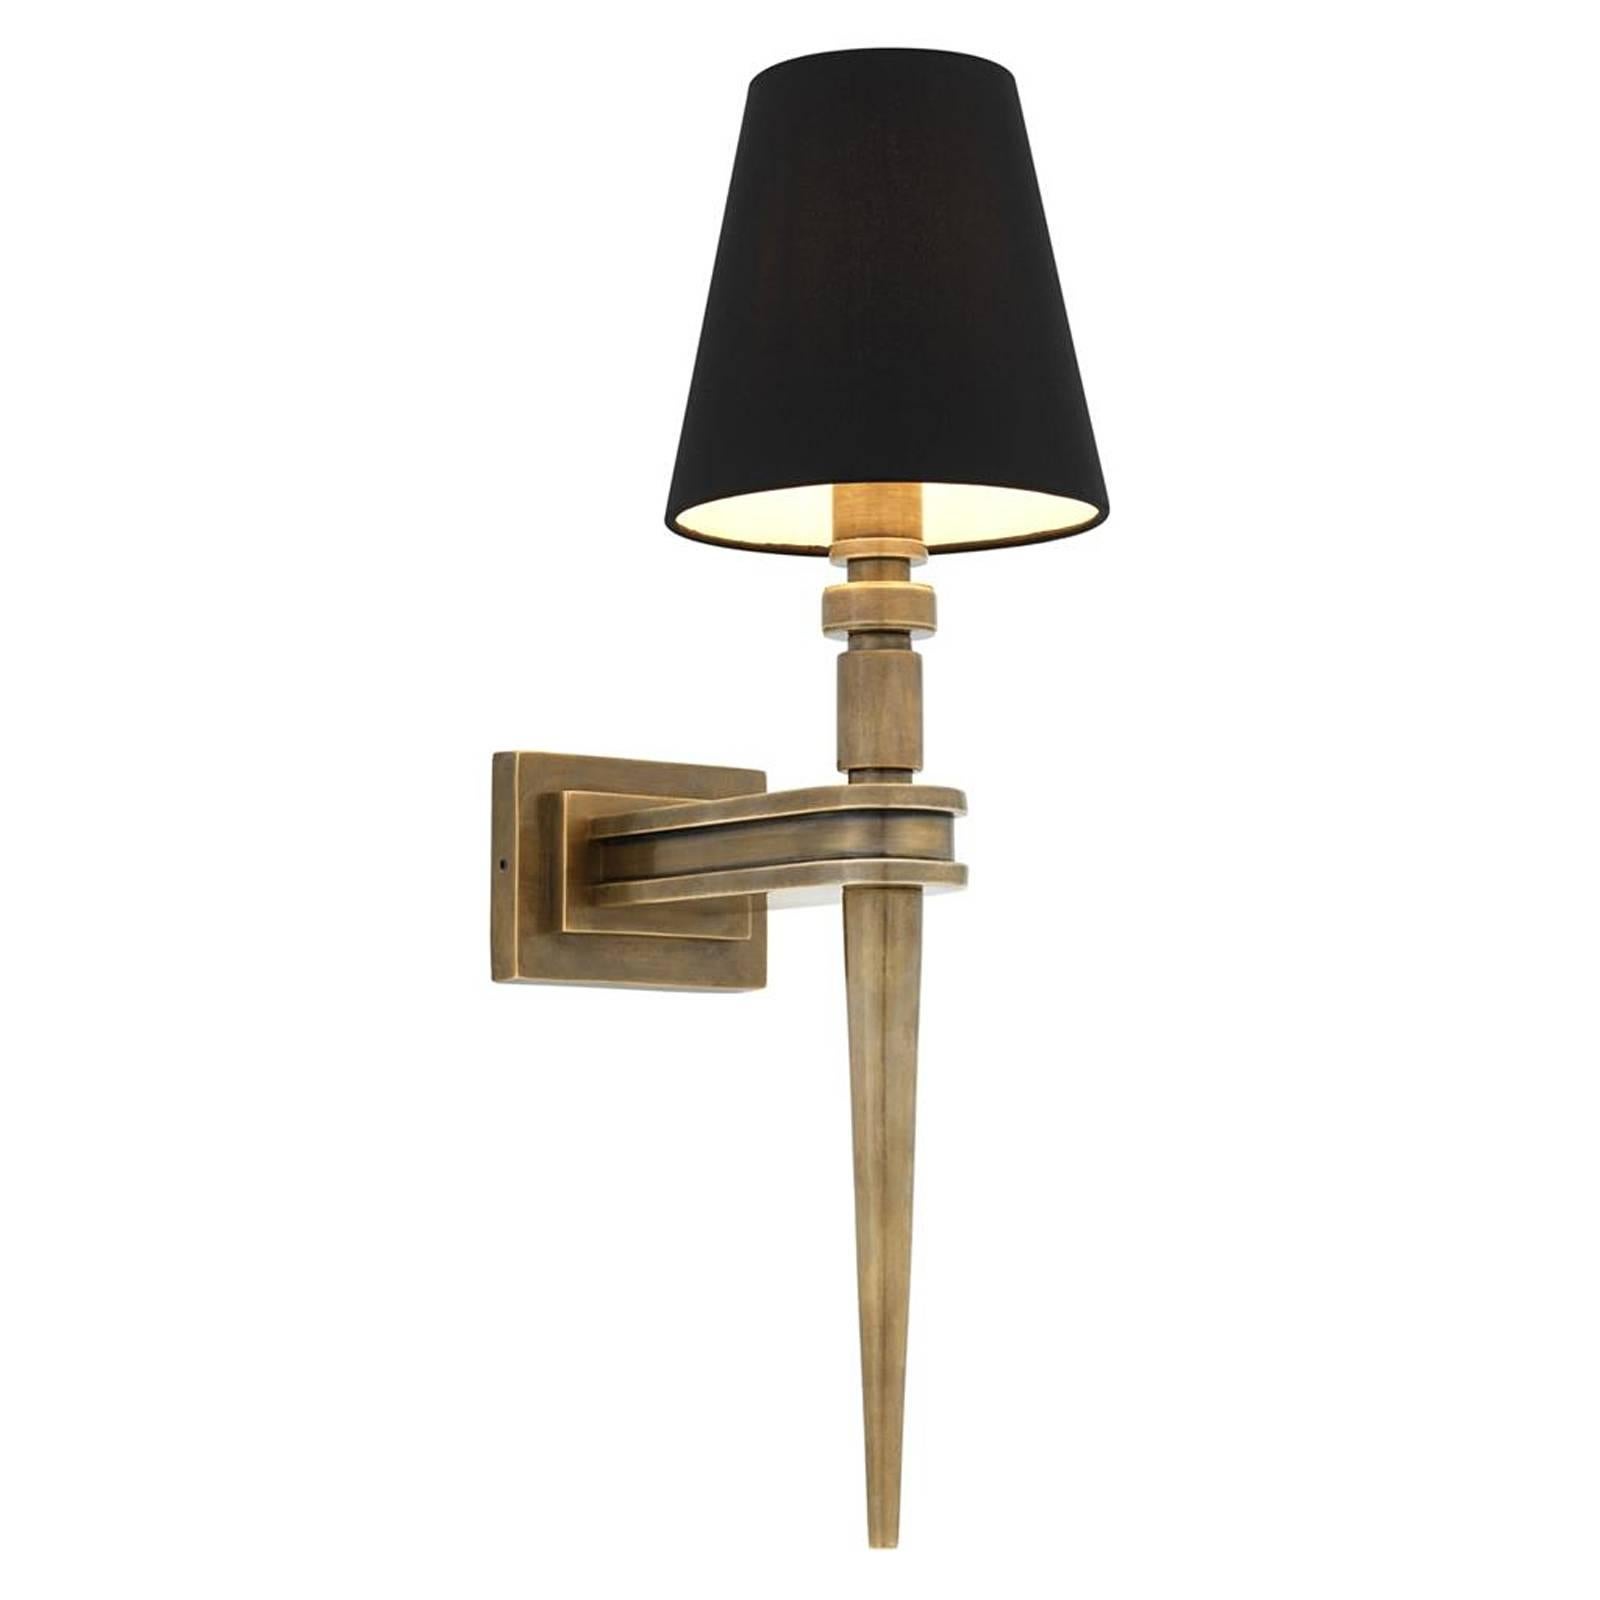 Austerlitz Single Wall Lamp in Vintage Brass or in Nickel Finish For Sale